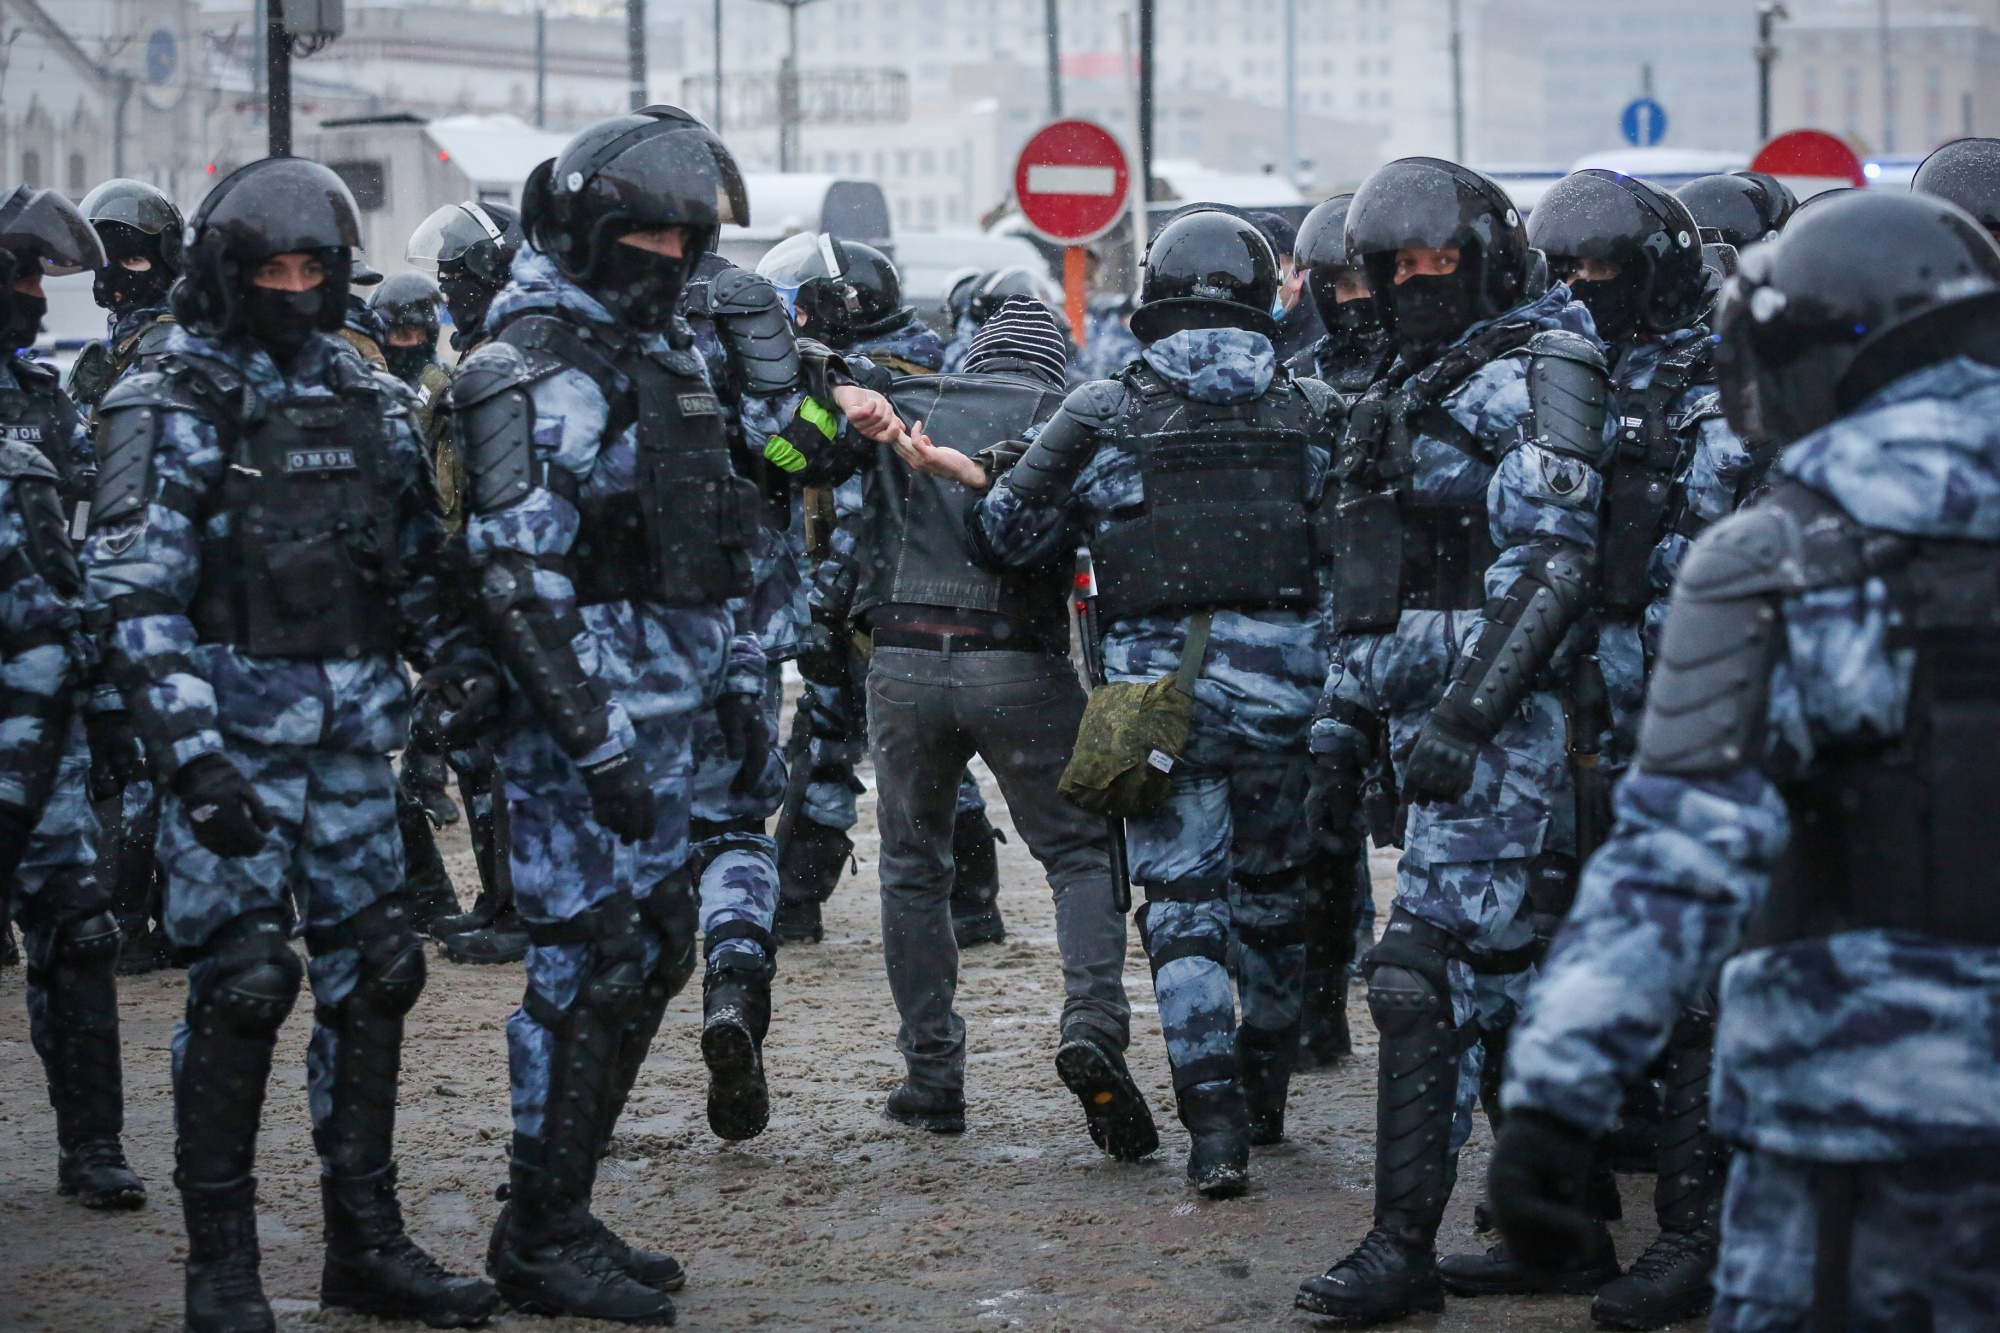 Riot police detain a protestor during a demonstration in support of Russian opposition leader Alexey Navalny&nbsp;in Moscow on Jan. 31.